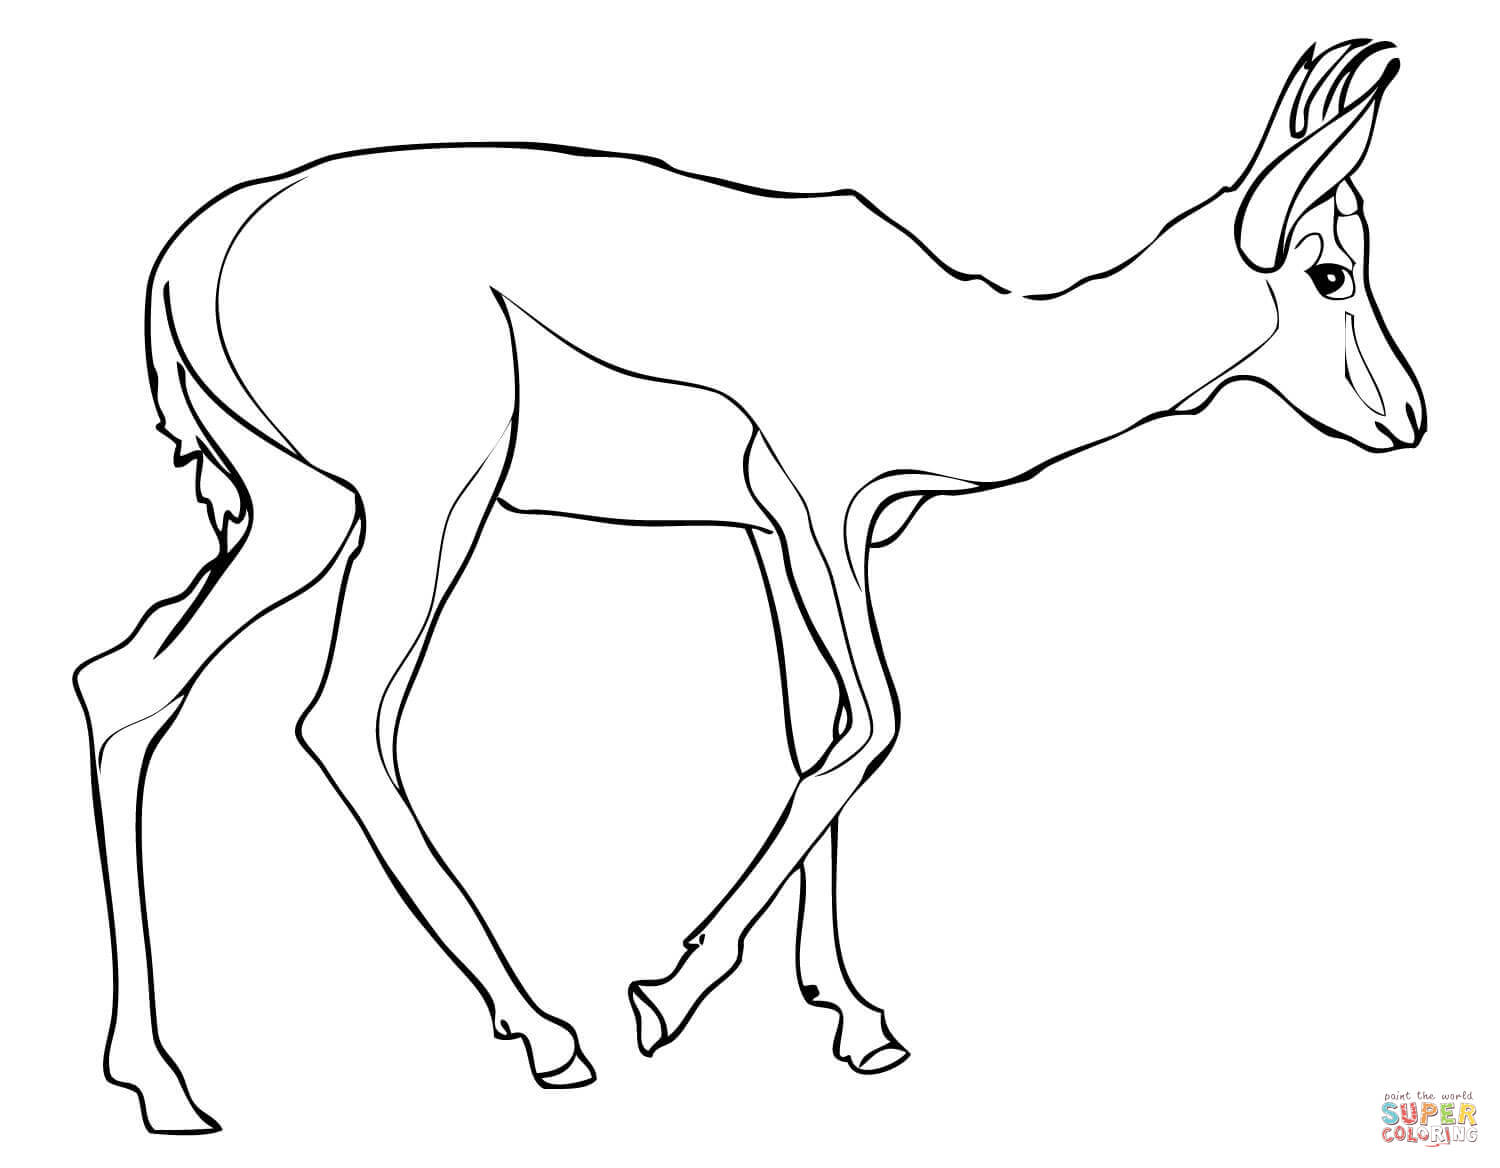 Springbok coloring page | Free Printable Coloring Pages